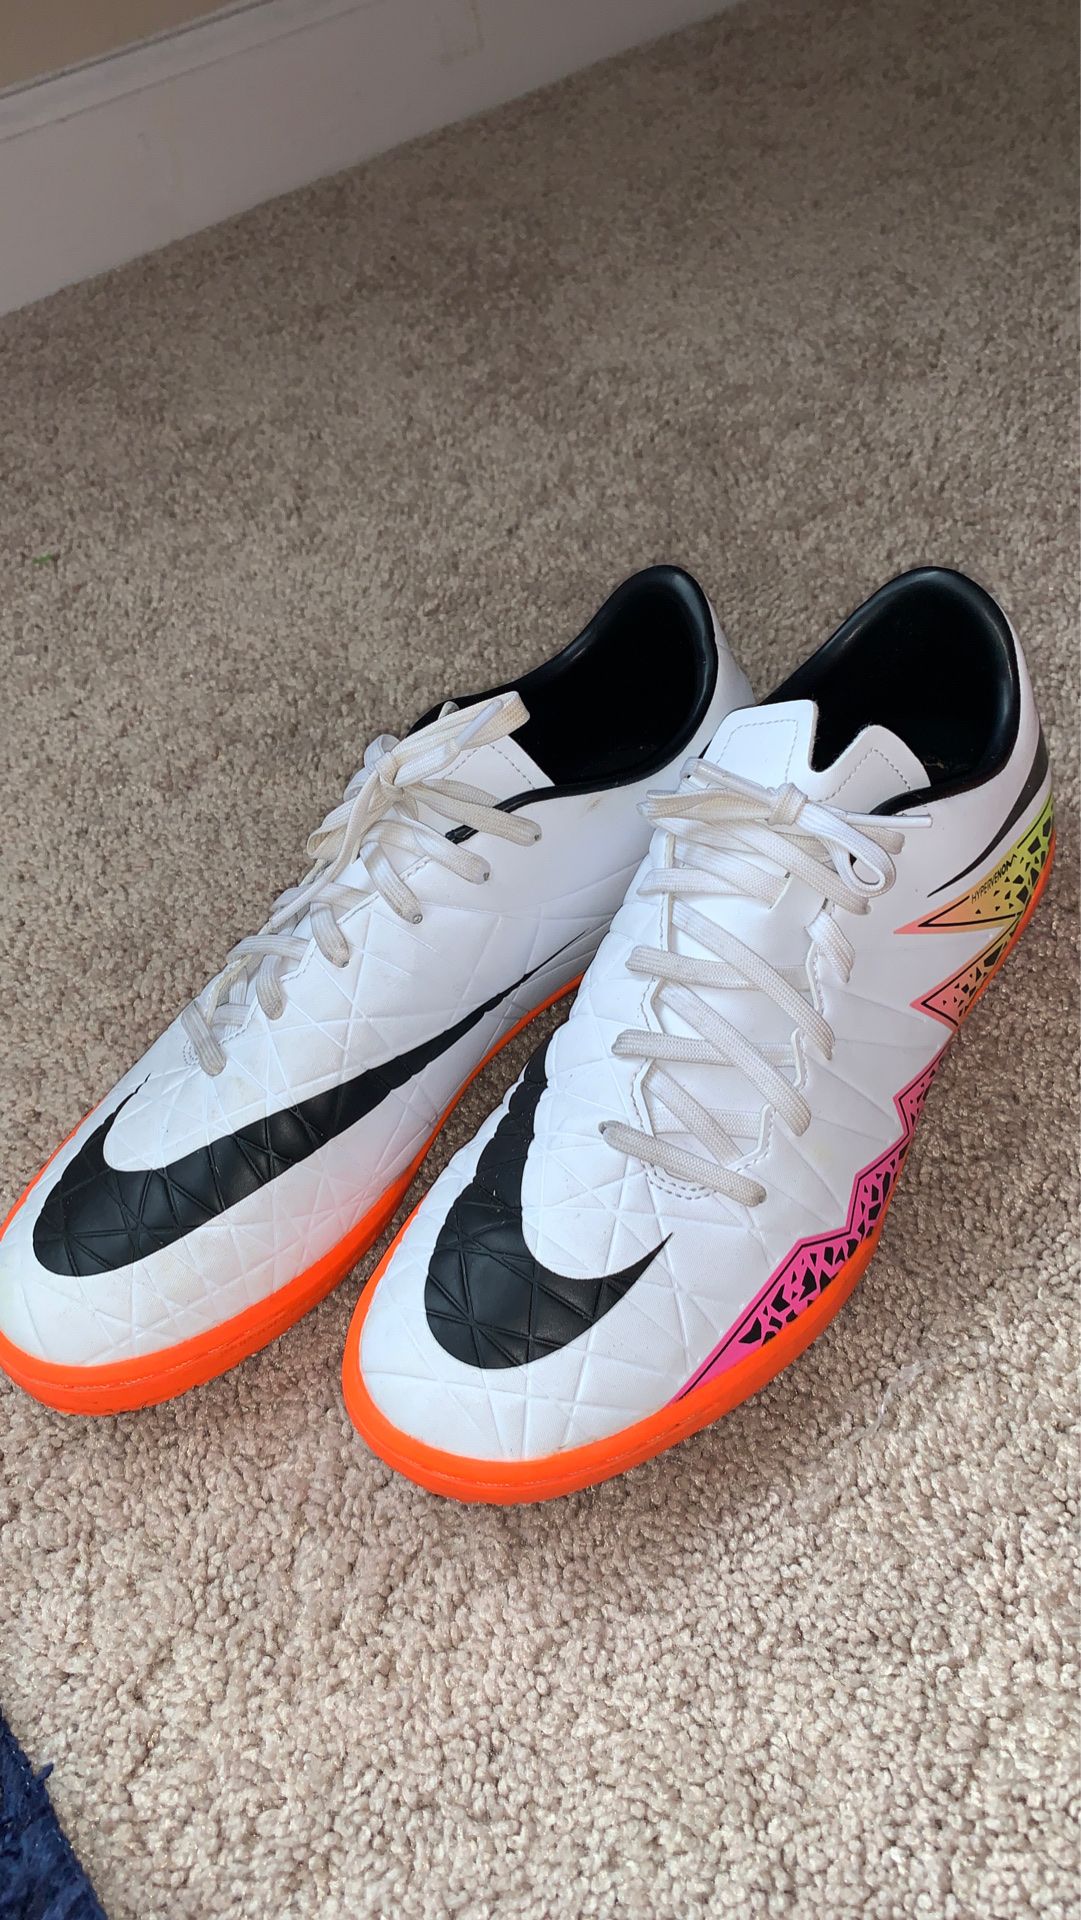 Nike indoor soccer shoes